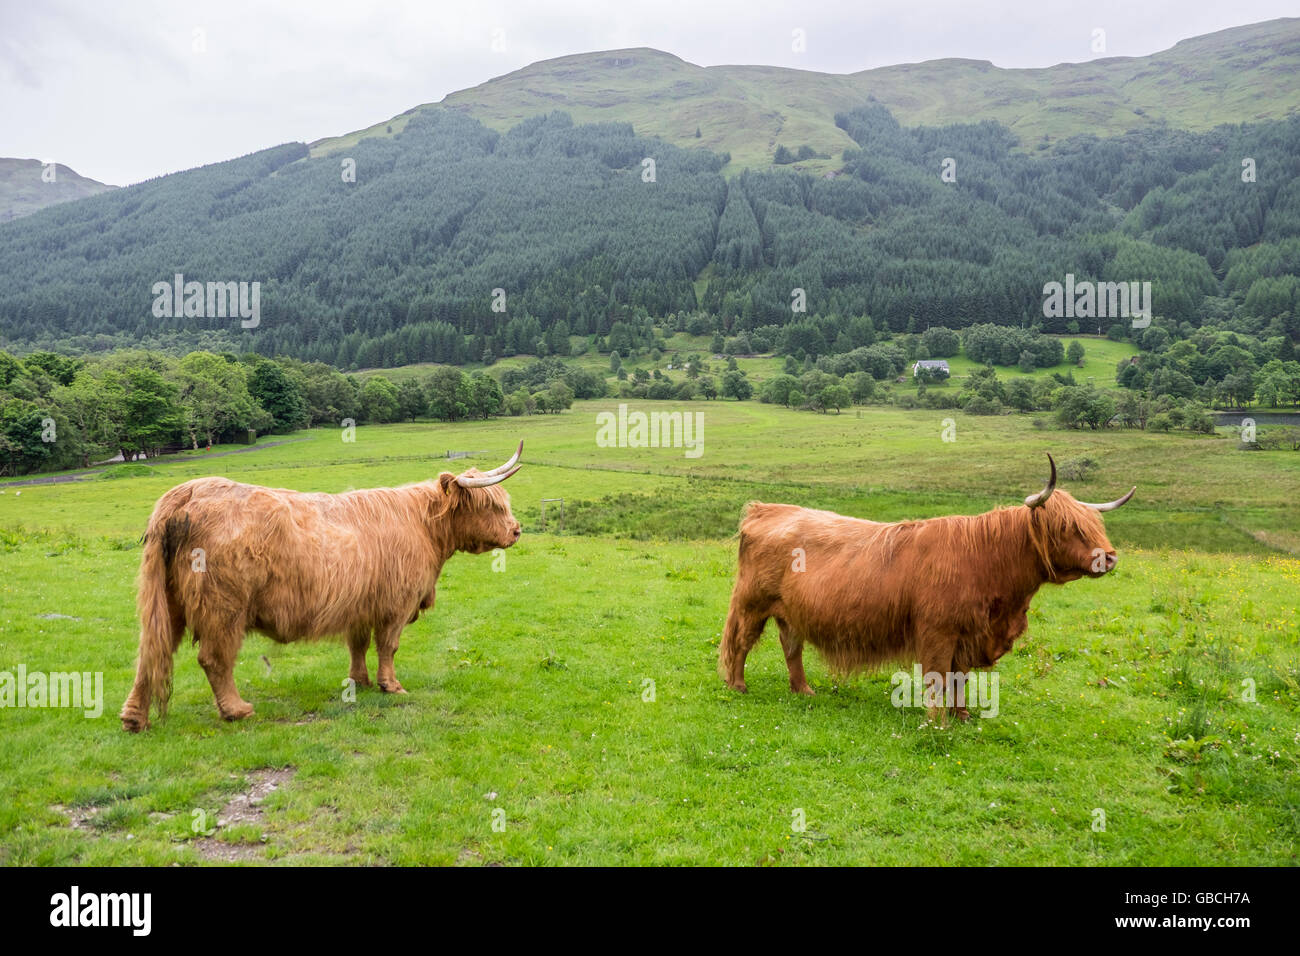 Typical Scottish scene of pair of Highland cattle in farmland with wooded hills in the background Stock Photo